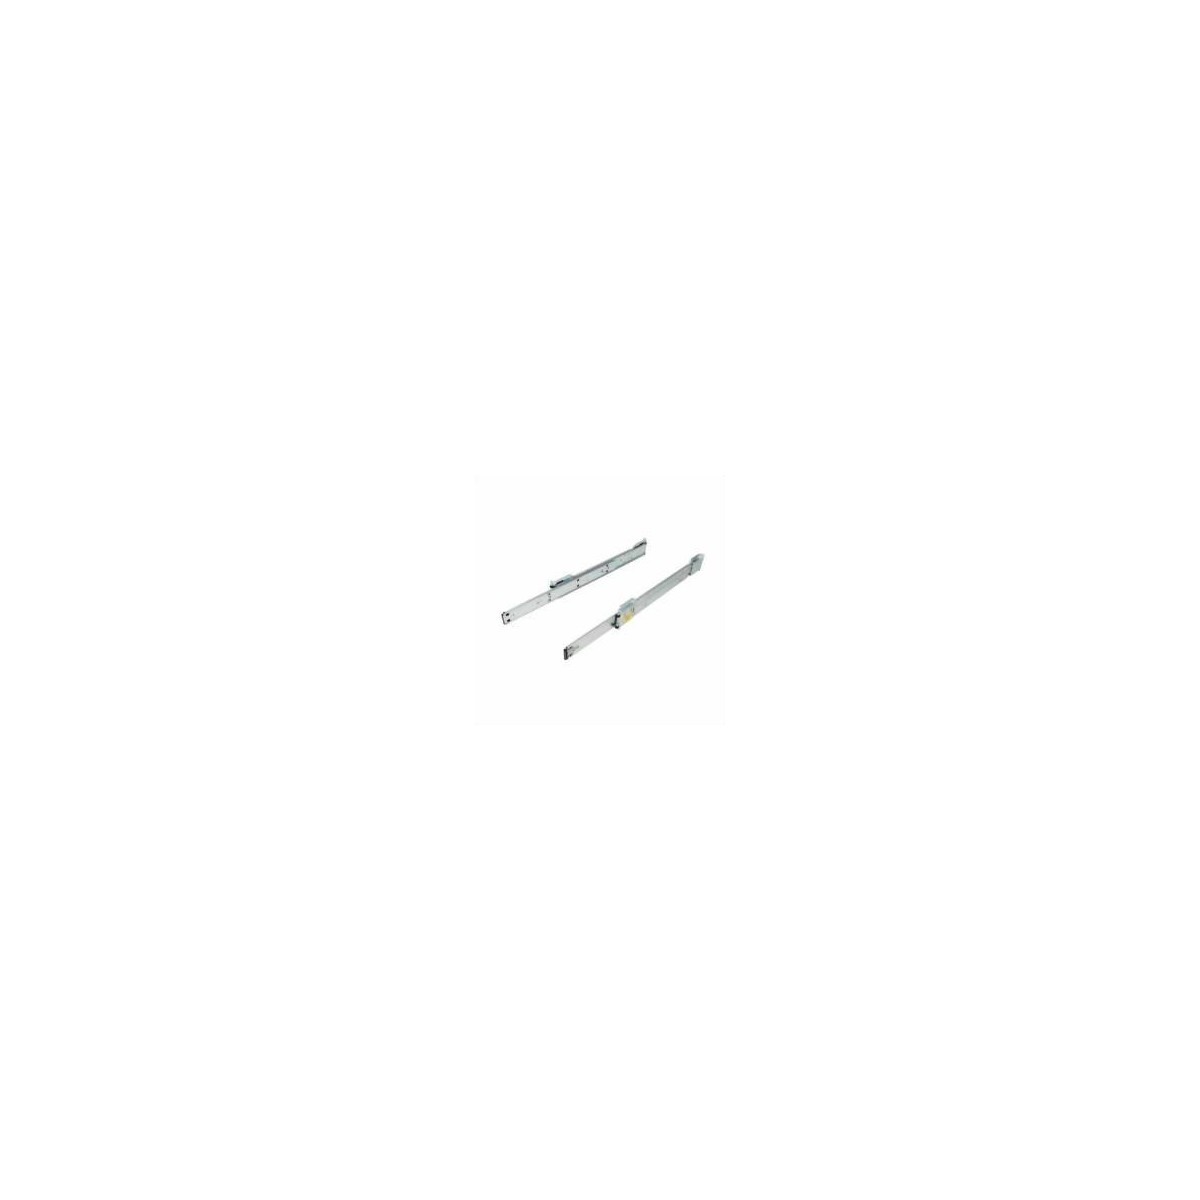 Supermicro Outer rail - Other - Metal - Brushed steel - 48.3 cm (19) - SC815 - 20 pc(s)